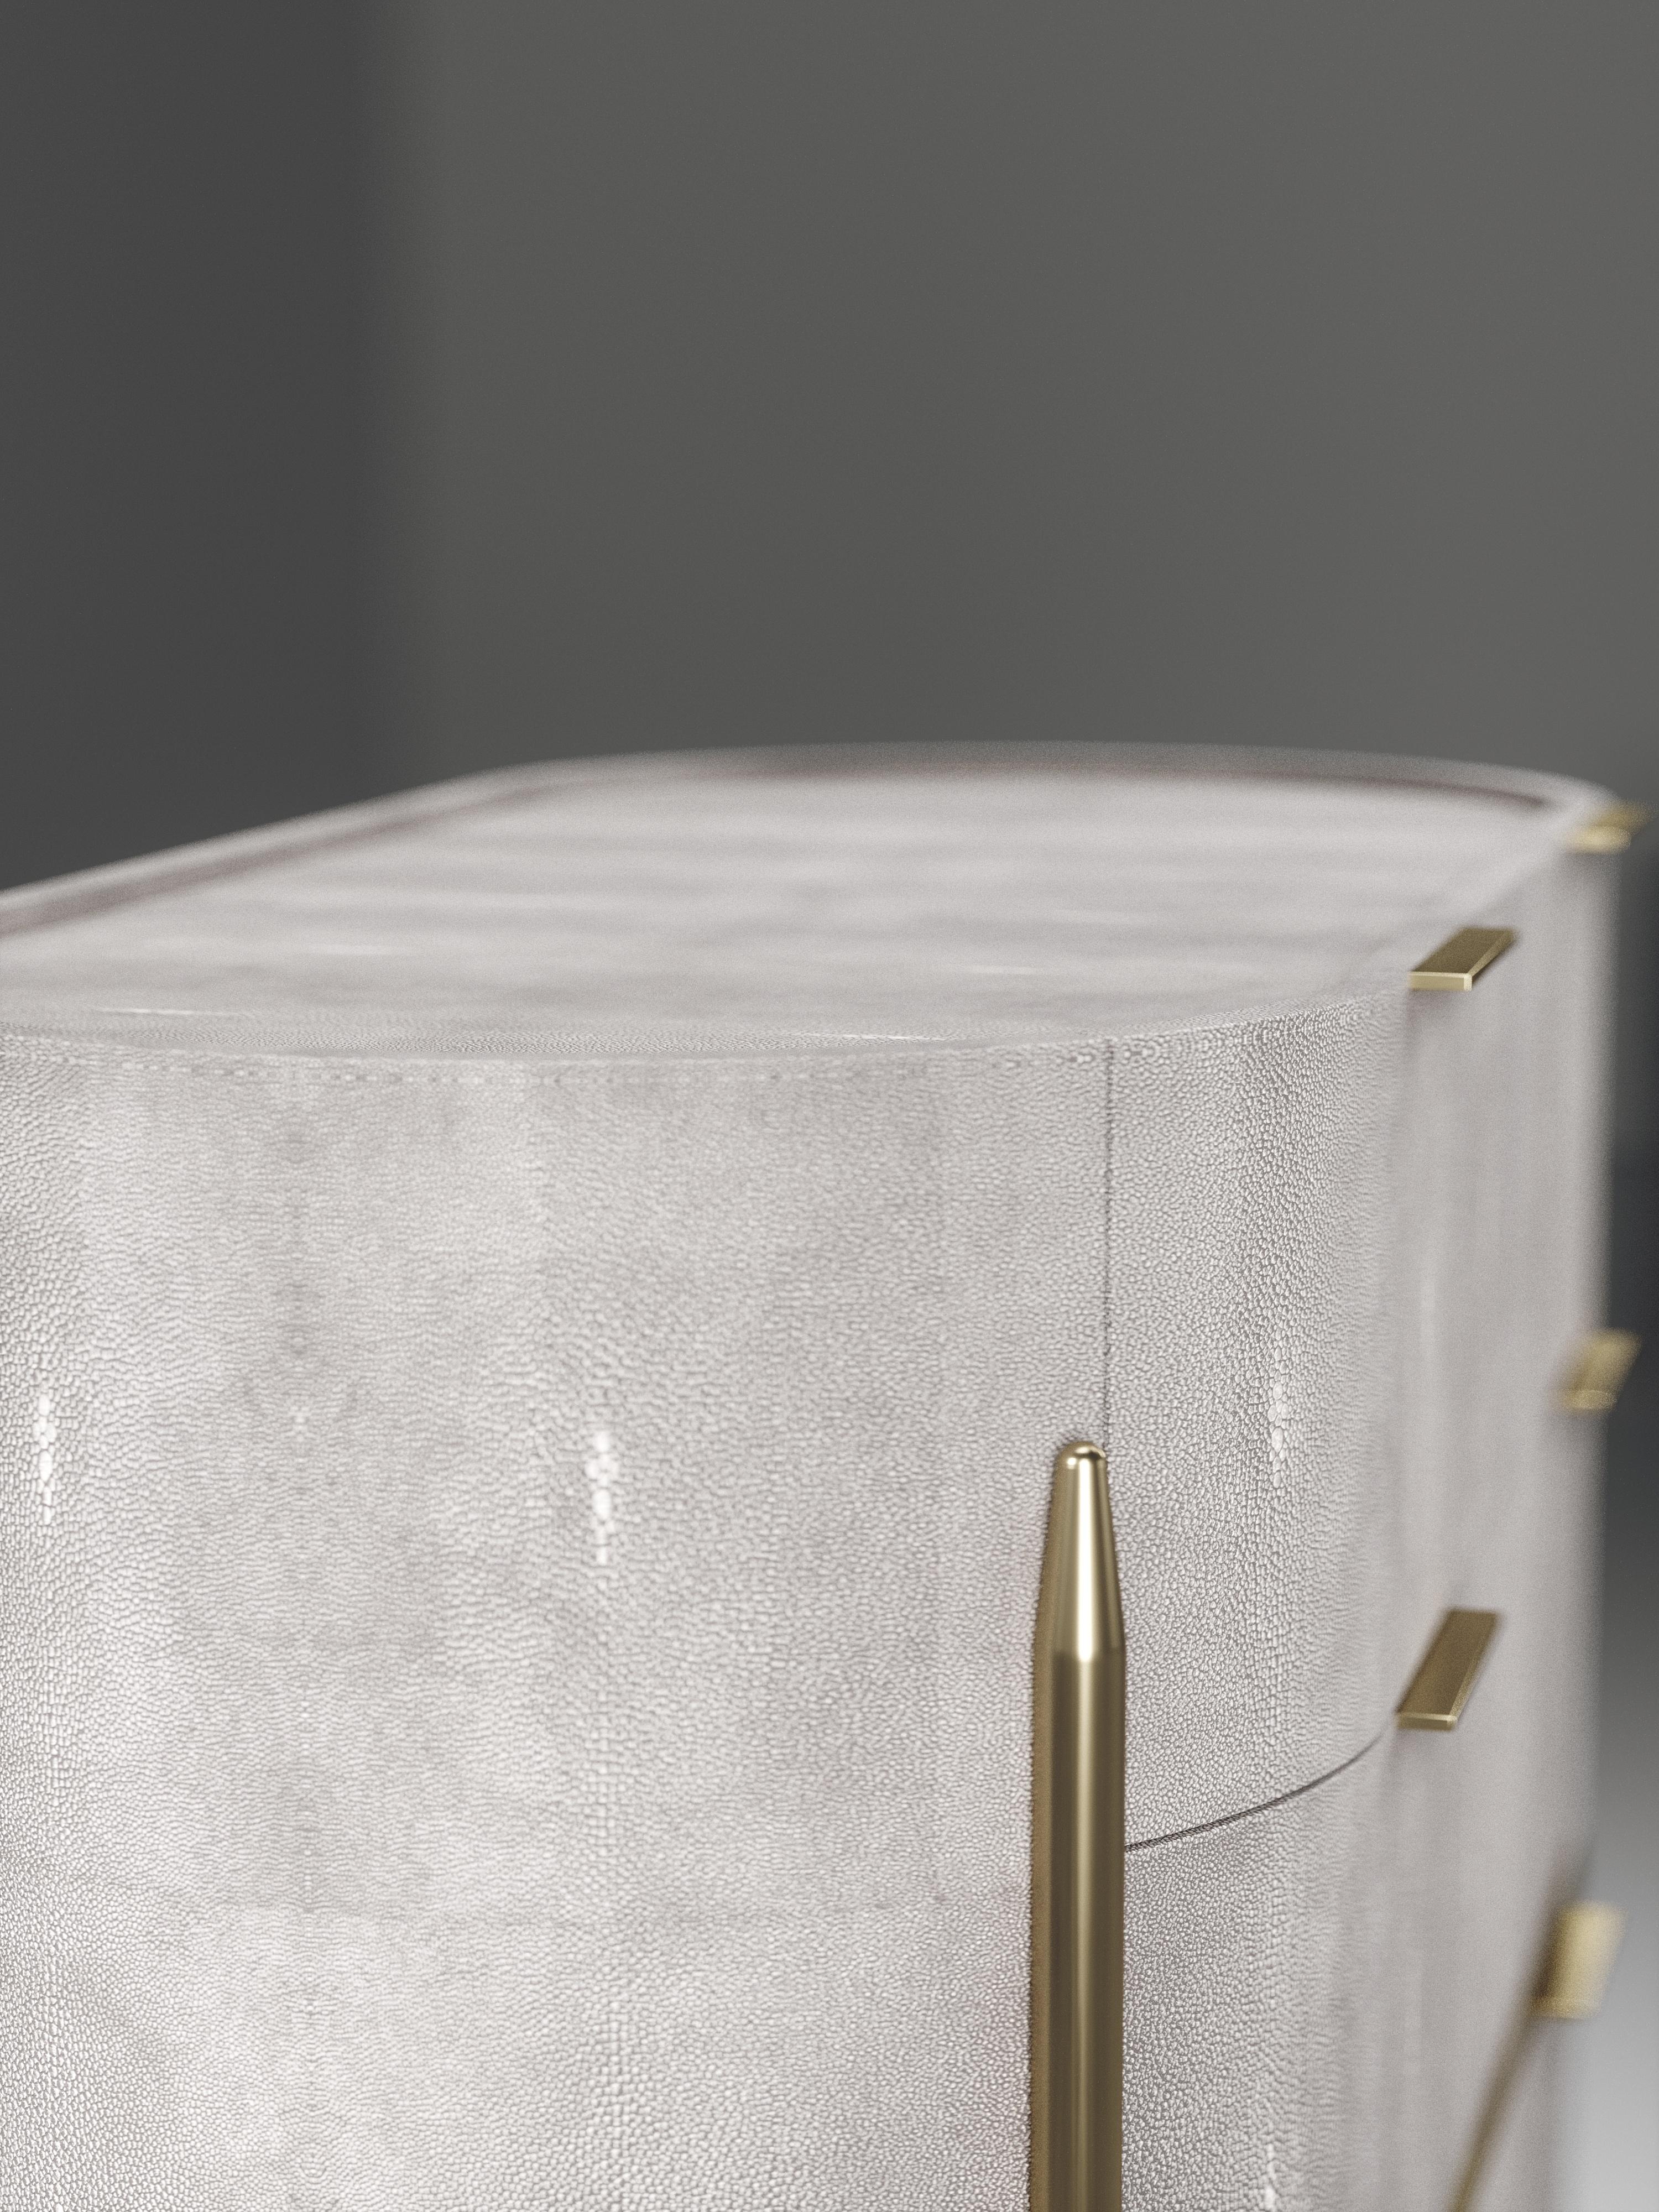 Shagreen Chest of Drawers with Brass Accents by Kifu Paris For Sale 4